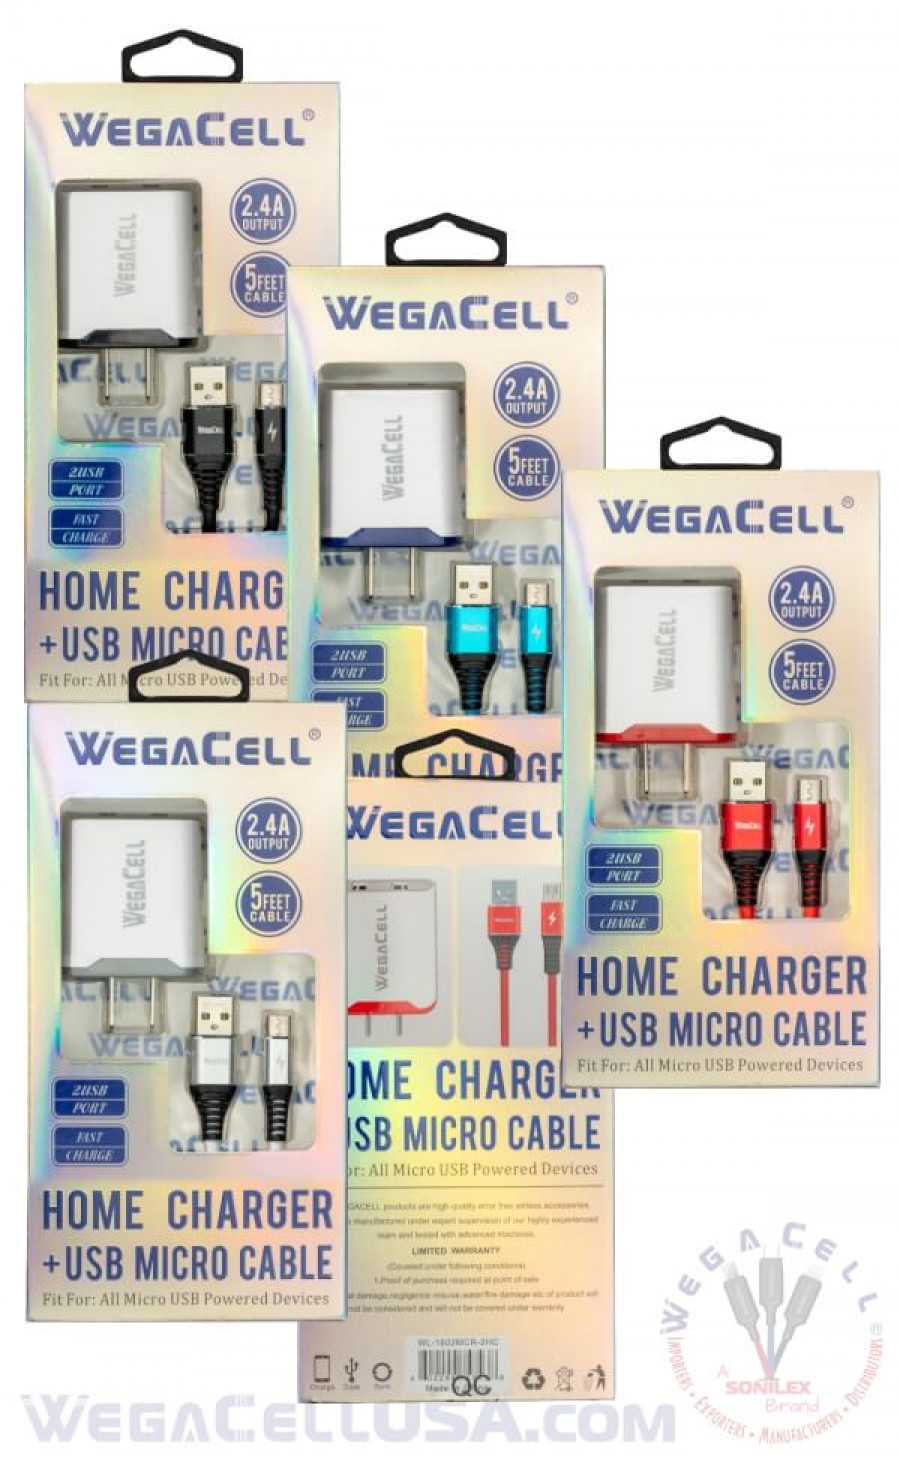 android universal dual port wall charger v8 micro cable combo - wholesale pkg. wegacell: wl-1602mcr-2hc data cable charger combo 28